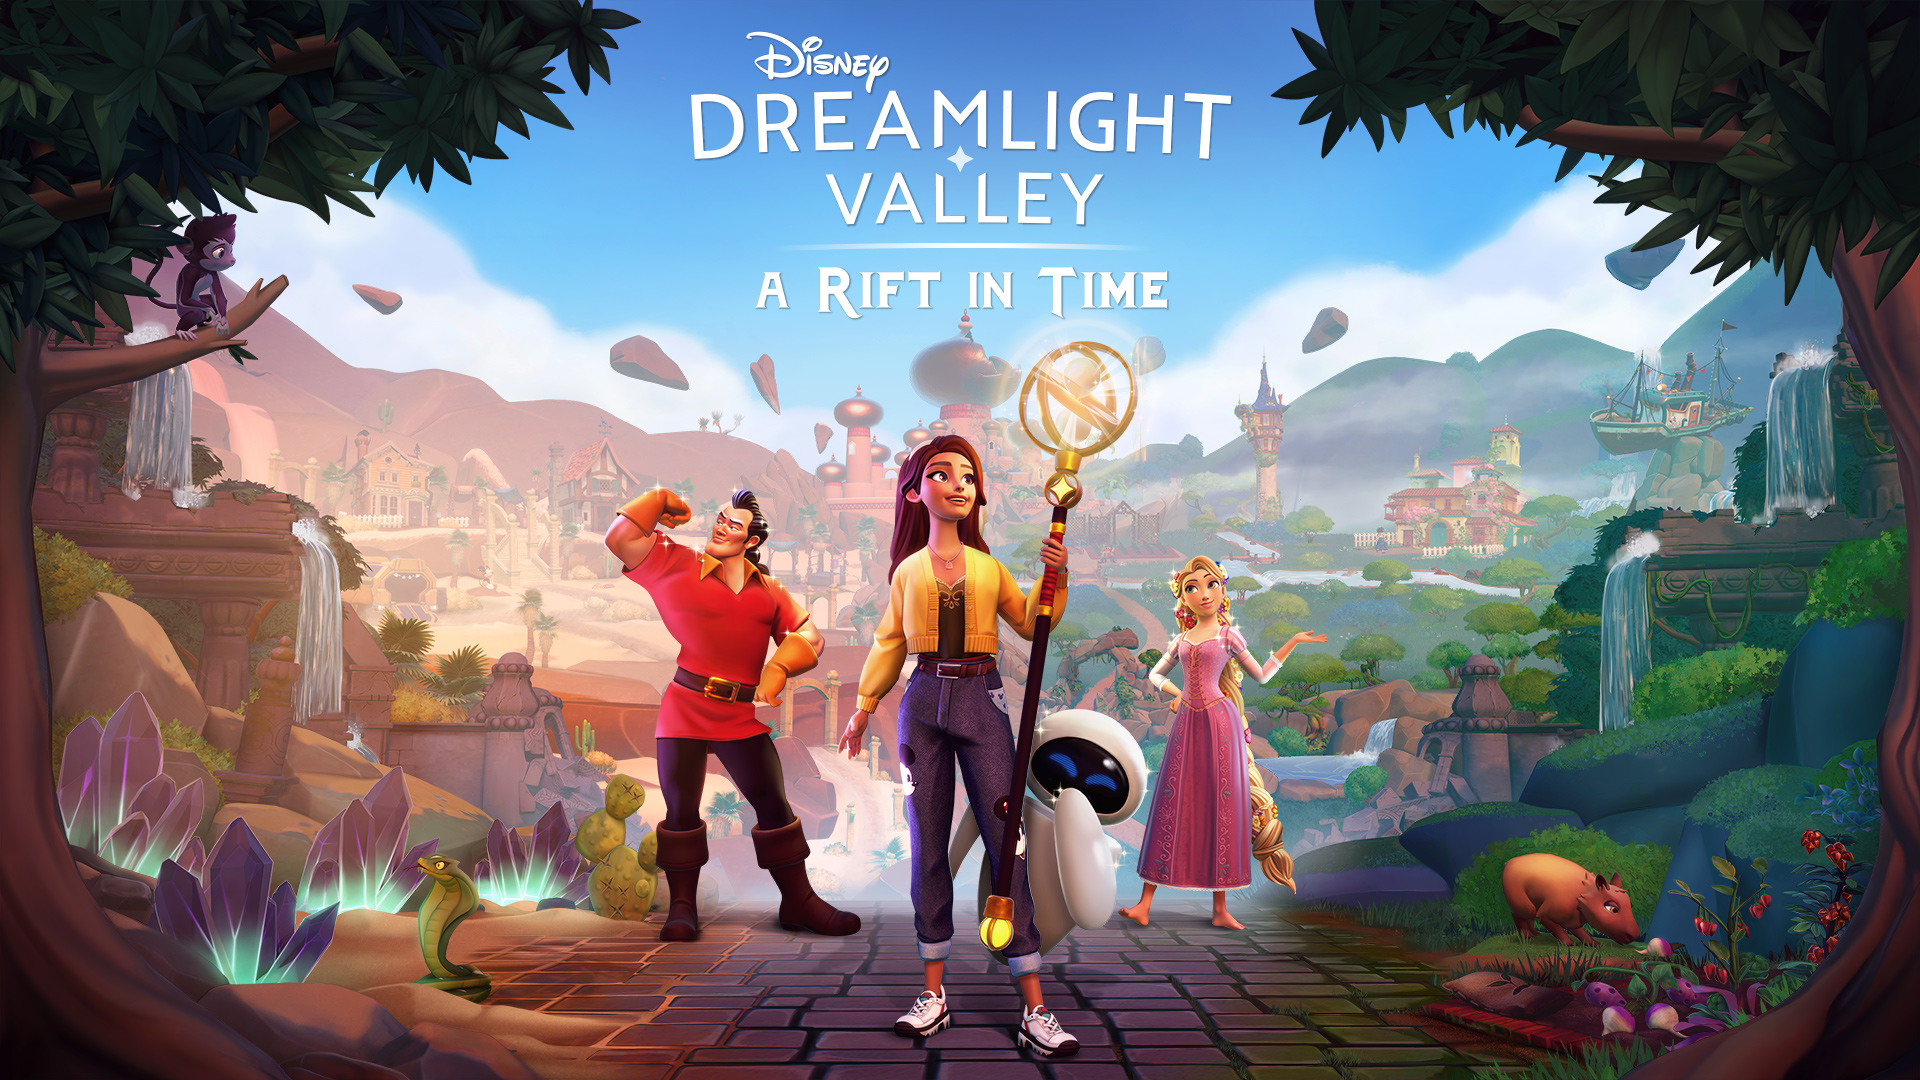 How To Complete the Diamond in the Rough Quest in Disney Dreamlight Valley